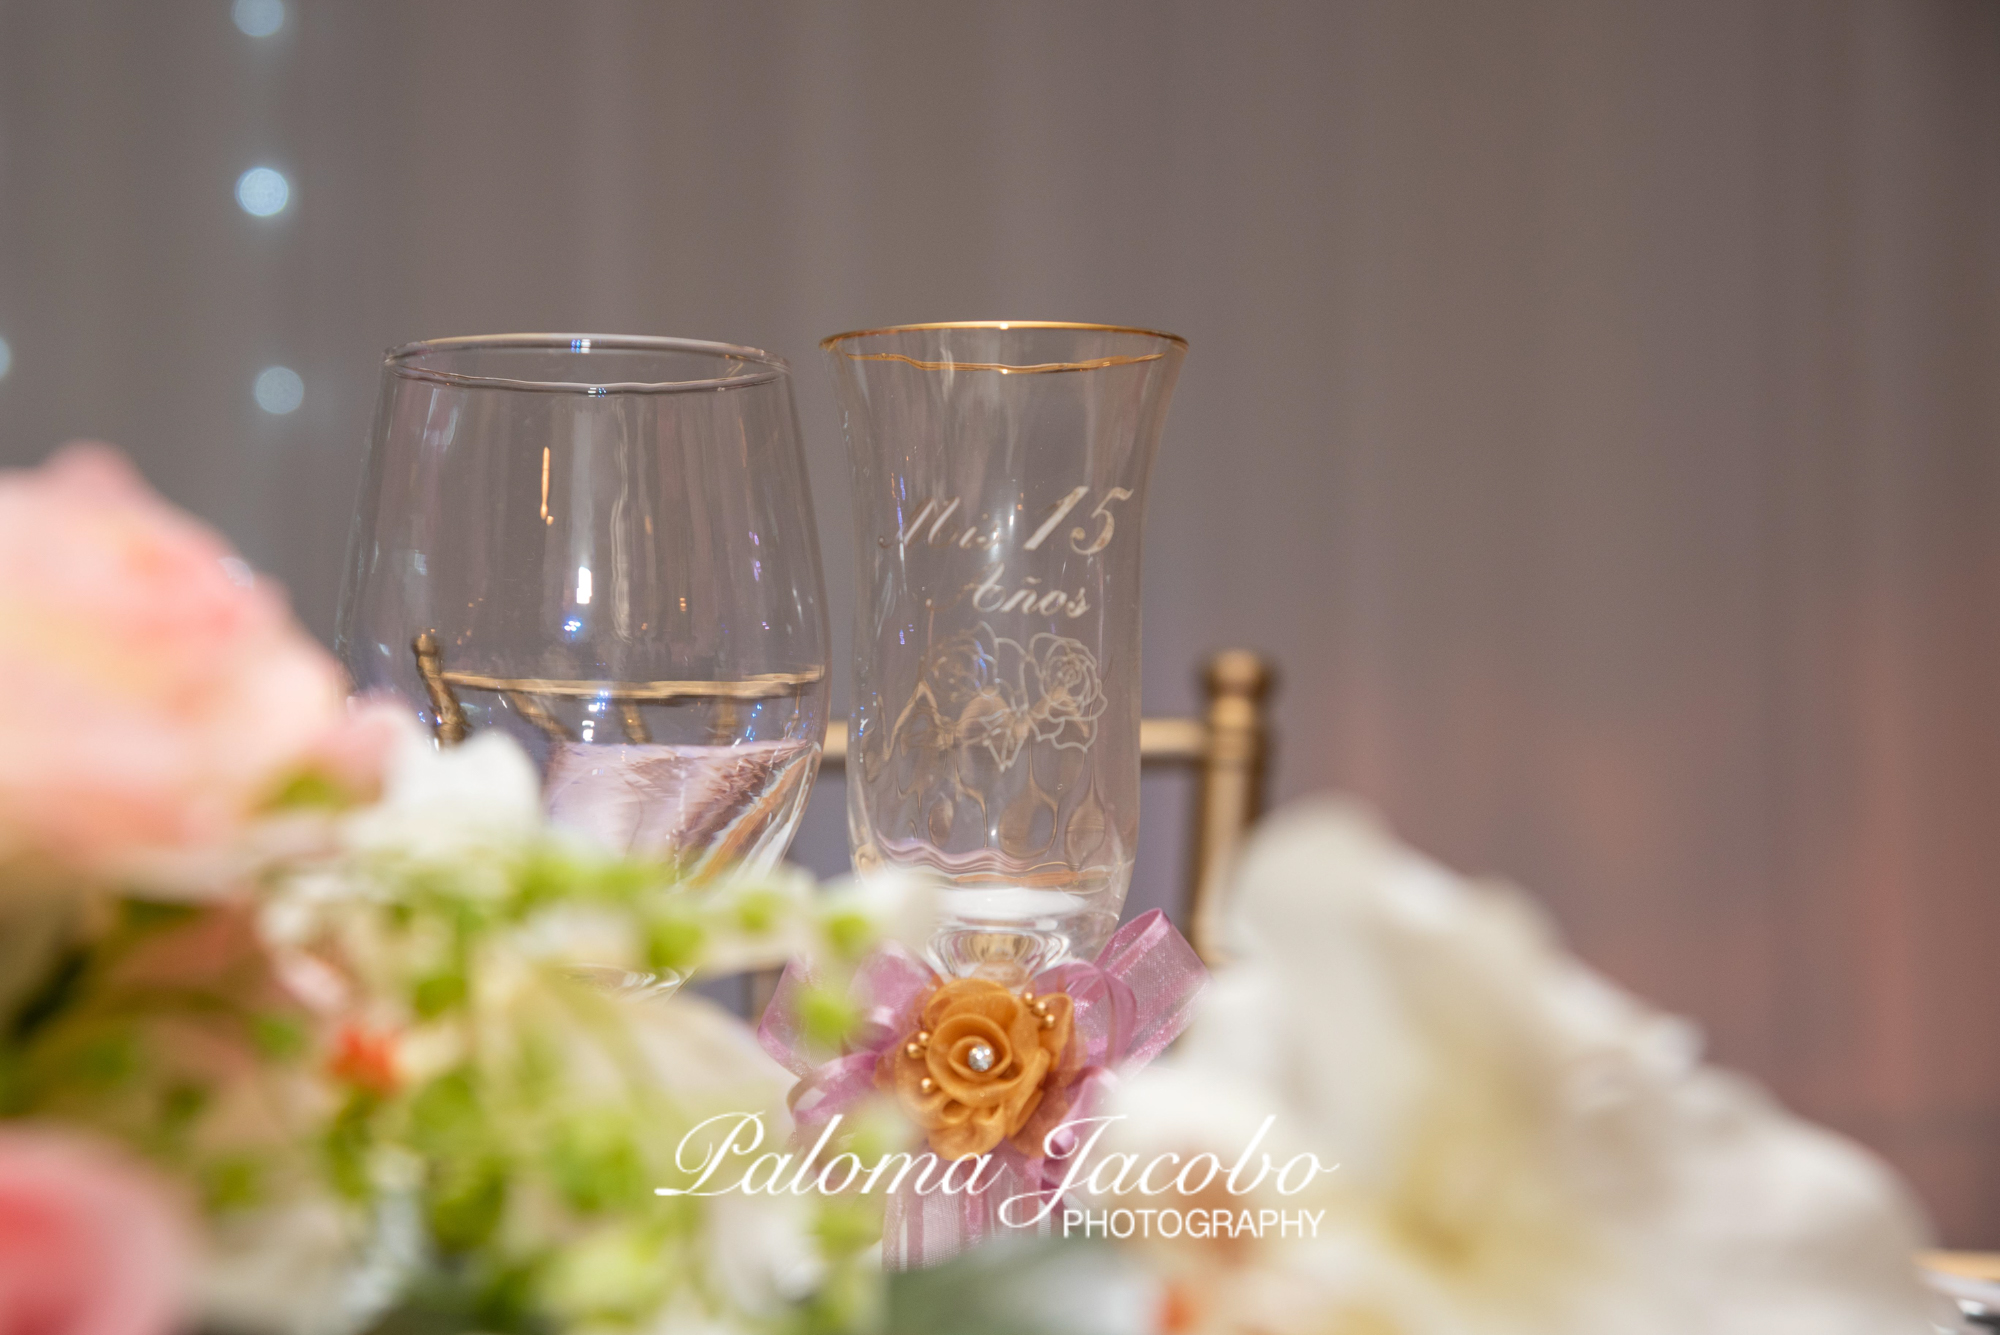 Toast glasses in blush pink and golden by Paloma Jacobo Photography